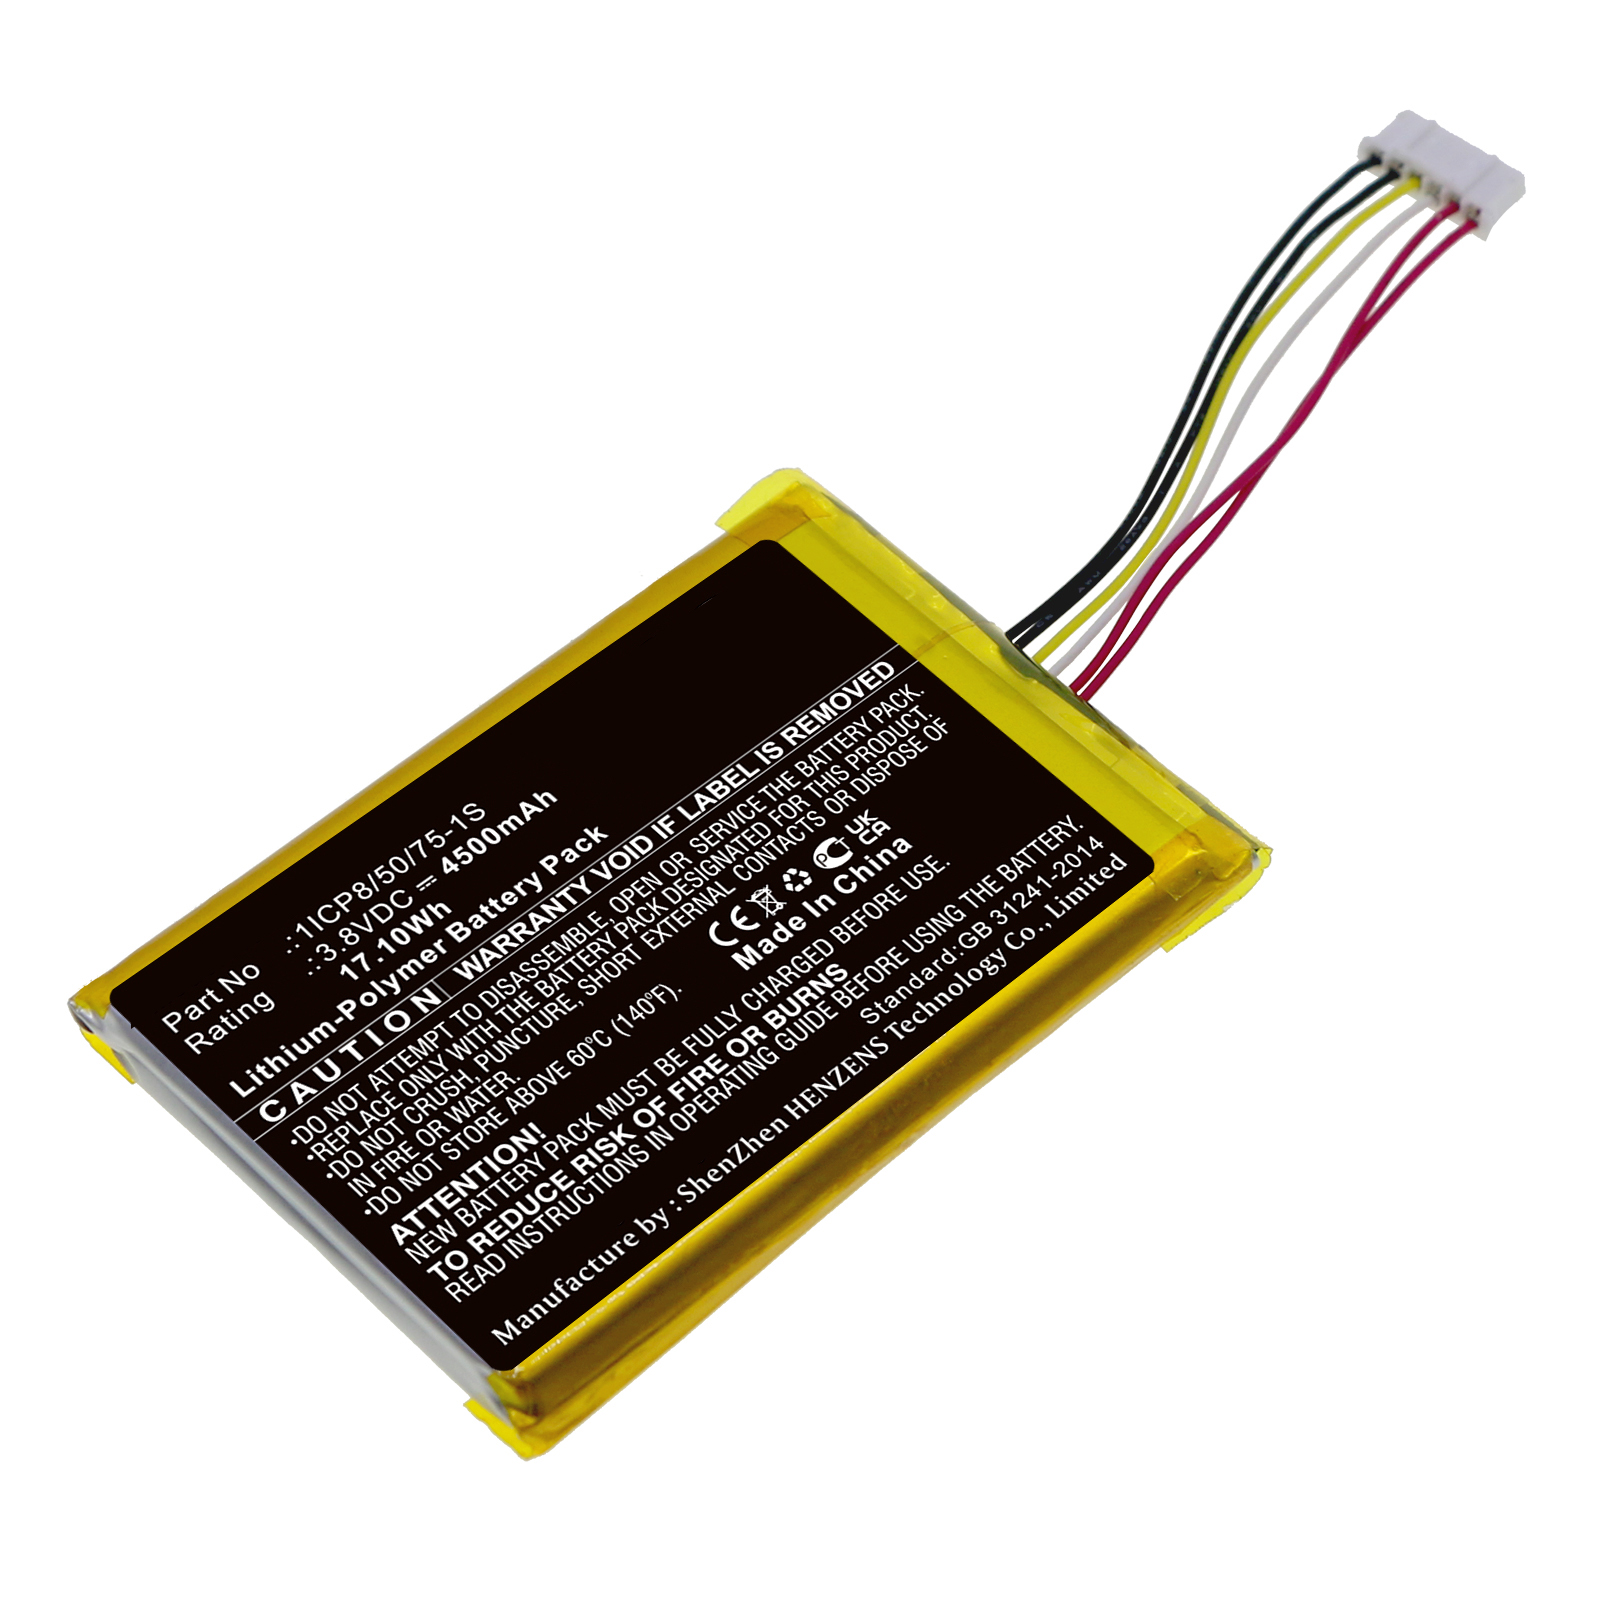 Synergy Digital Tablet Battery, Compatible with Launch 1ICP8/50/75-1S Tablet Battery (Li-Pol, 3.8V, 4500mAh)